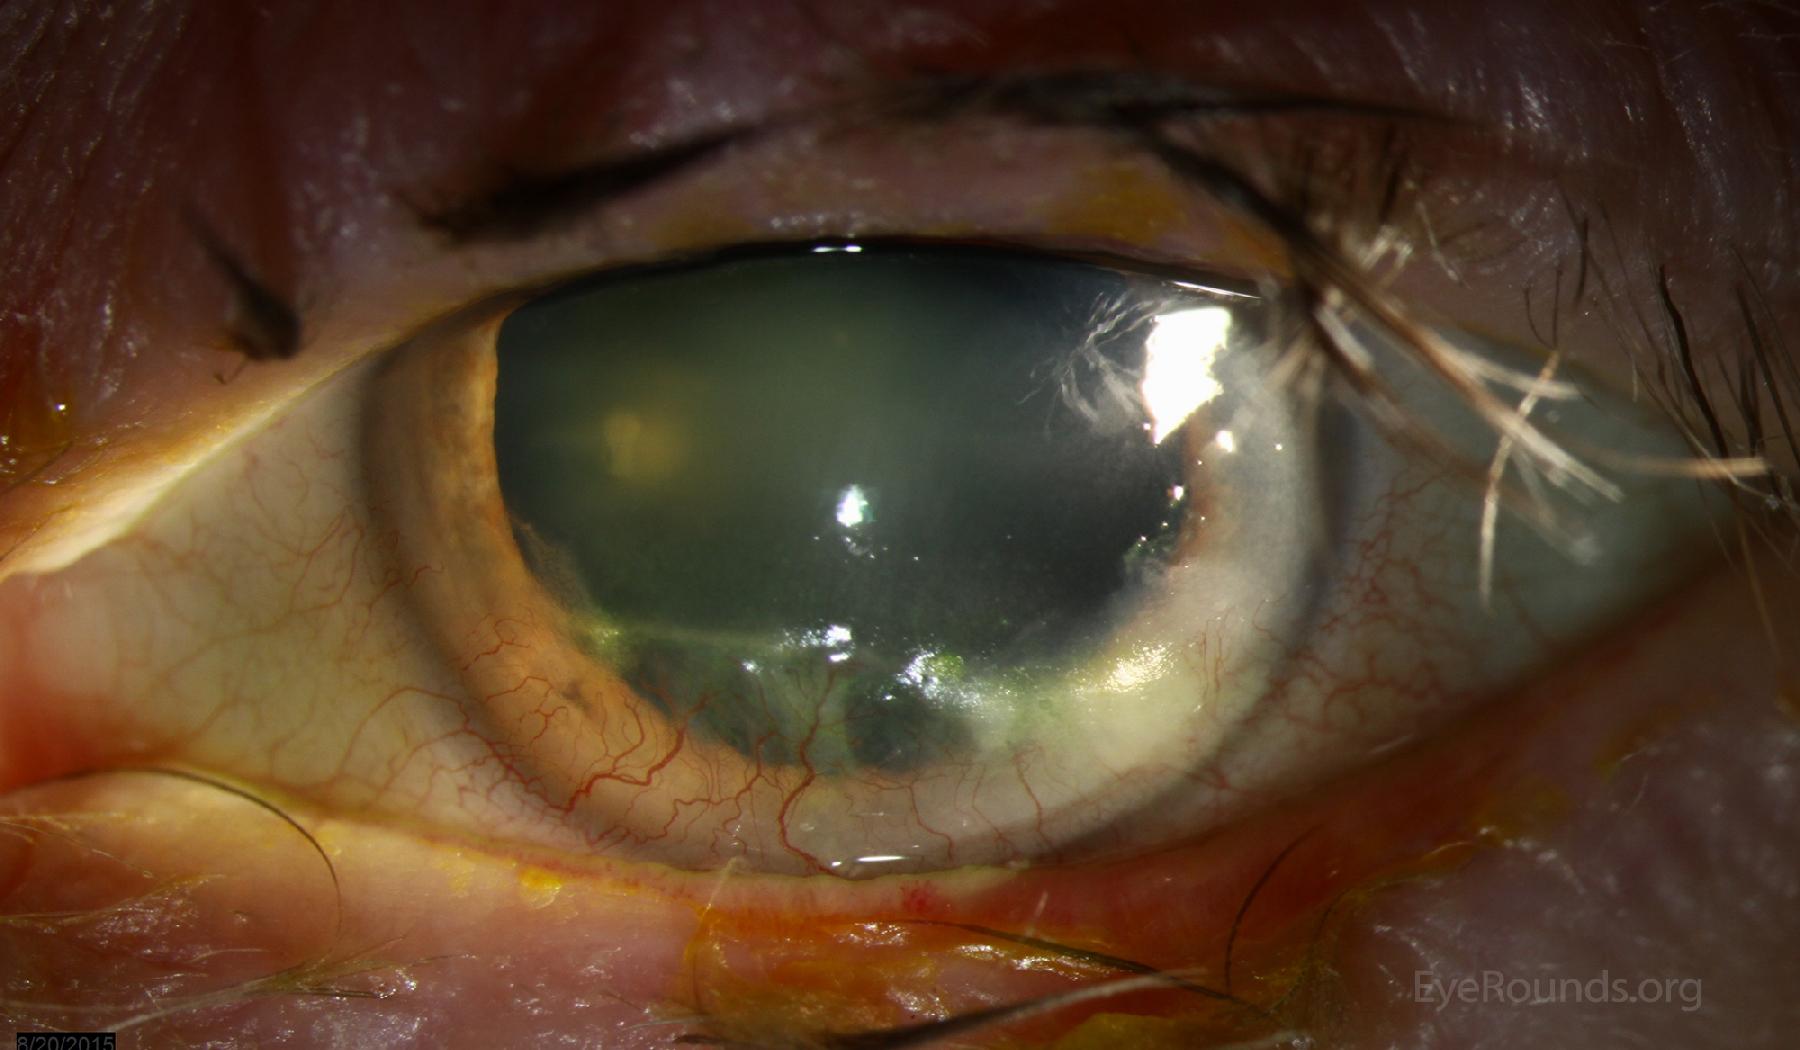 Bilateral rosacea keratitis with inferior pannus formation and Salzmann-like changes OD